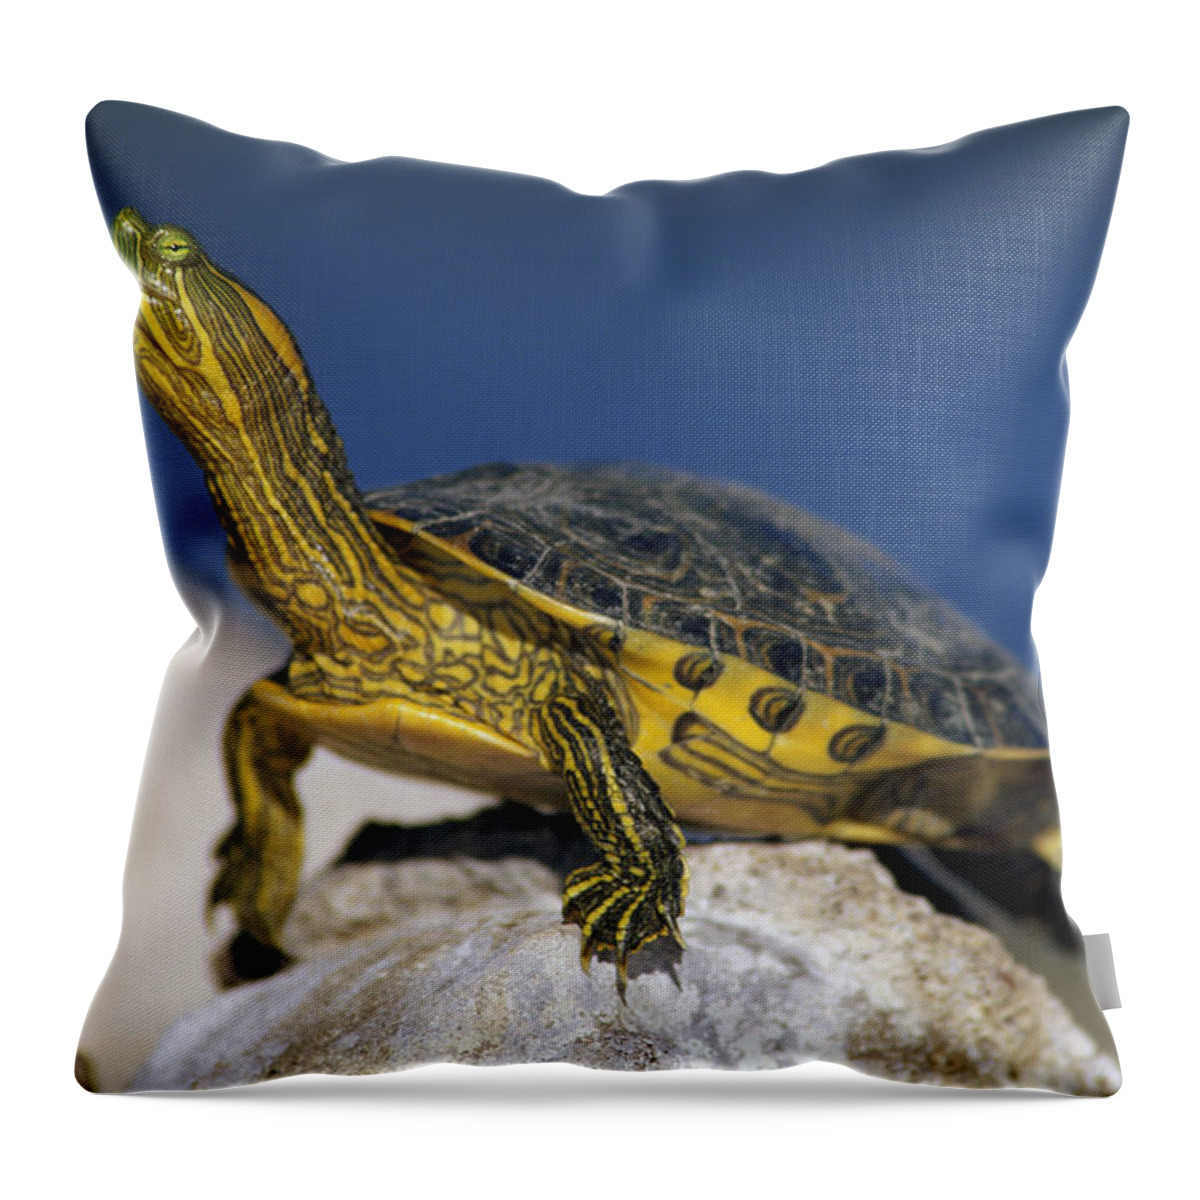 Mp Throw Pillow featuring the photograph Yellow-bellied Slider Trachemys Scripta by Tim Fitzharris